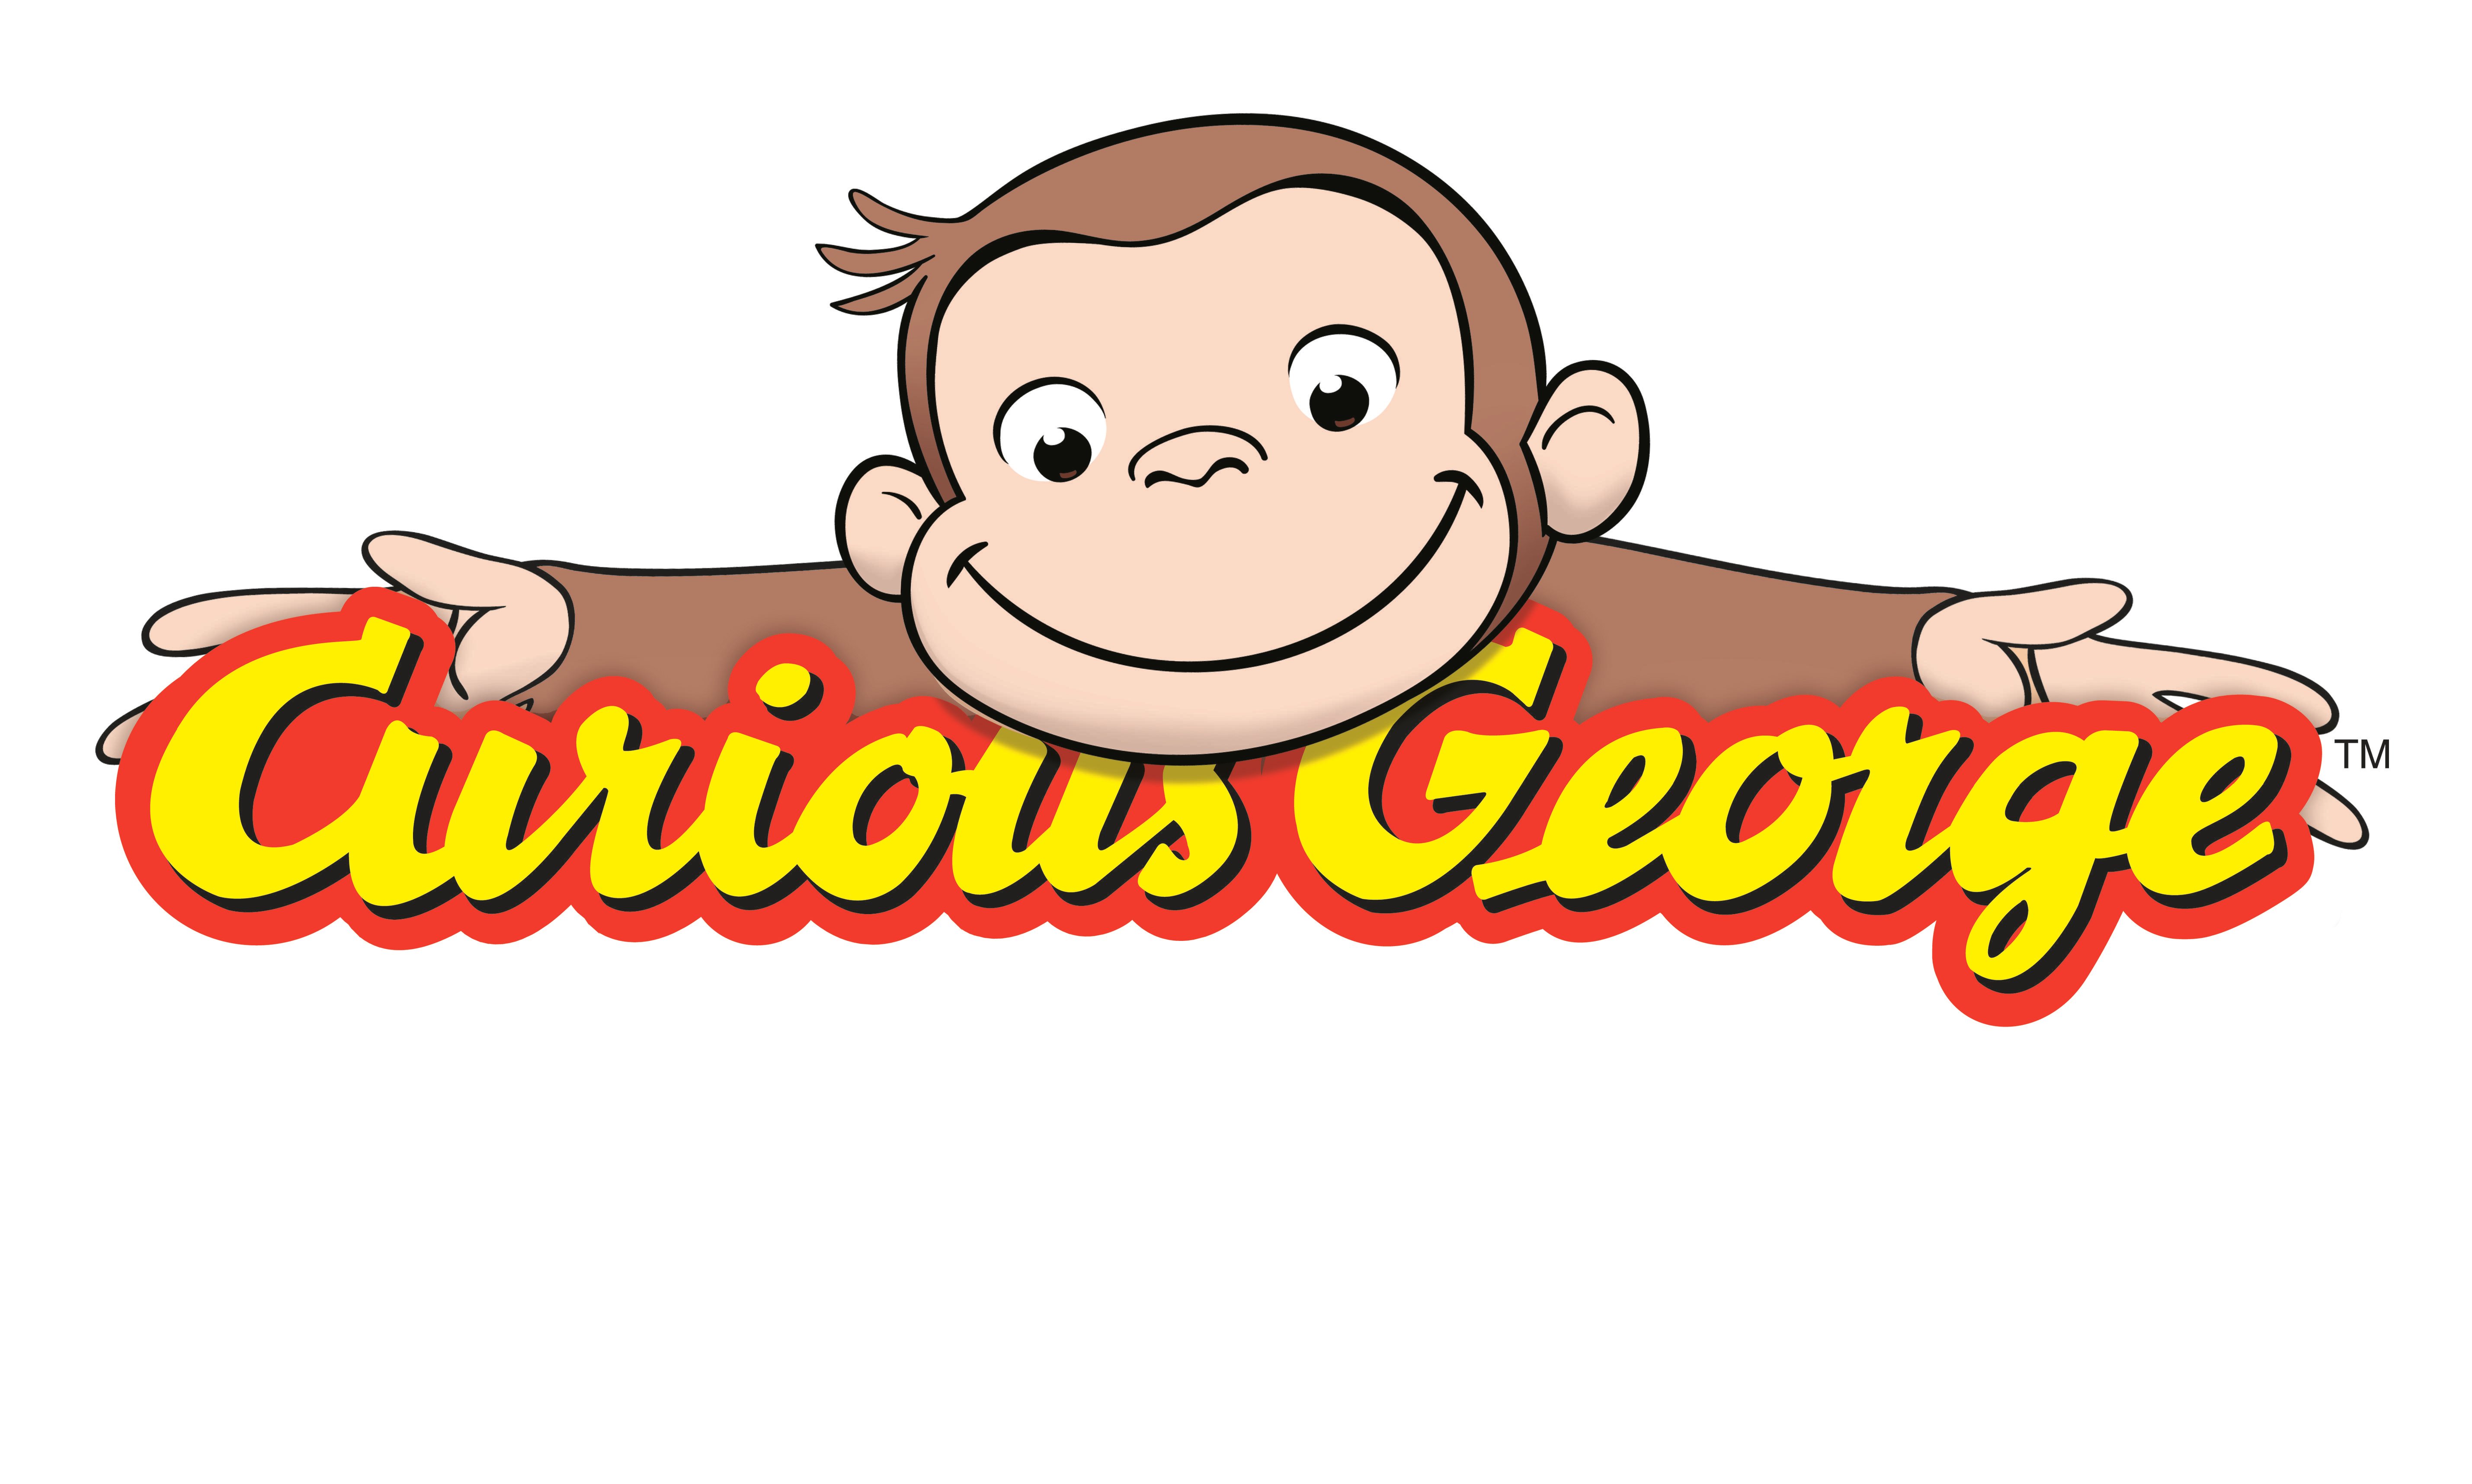 I Got Curious George Wallpaper Everybody  YouTube